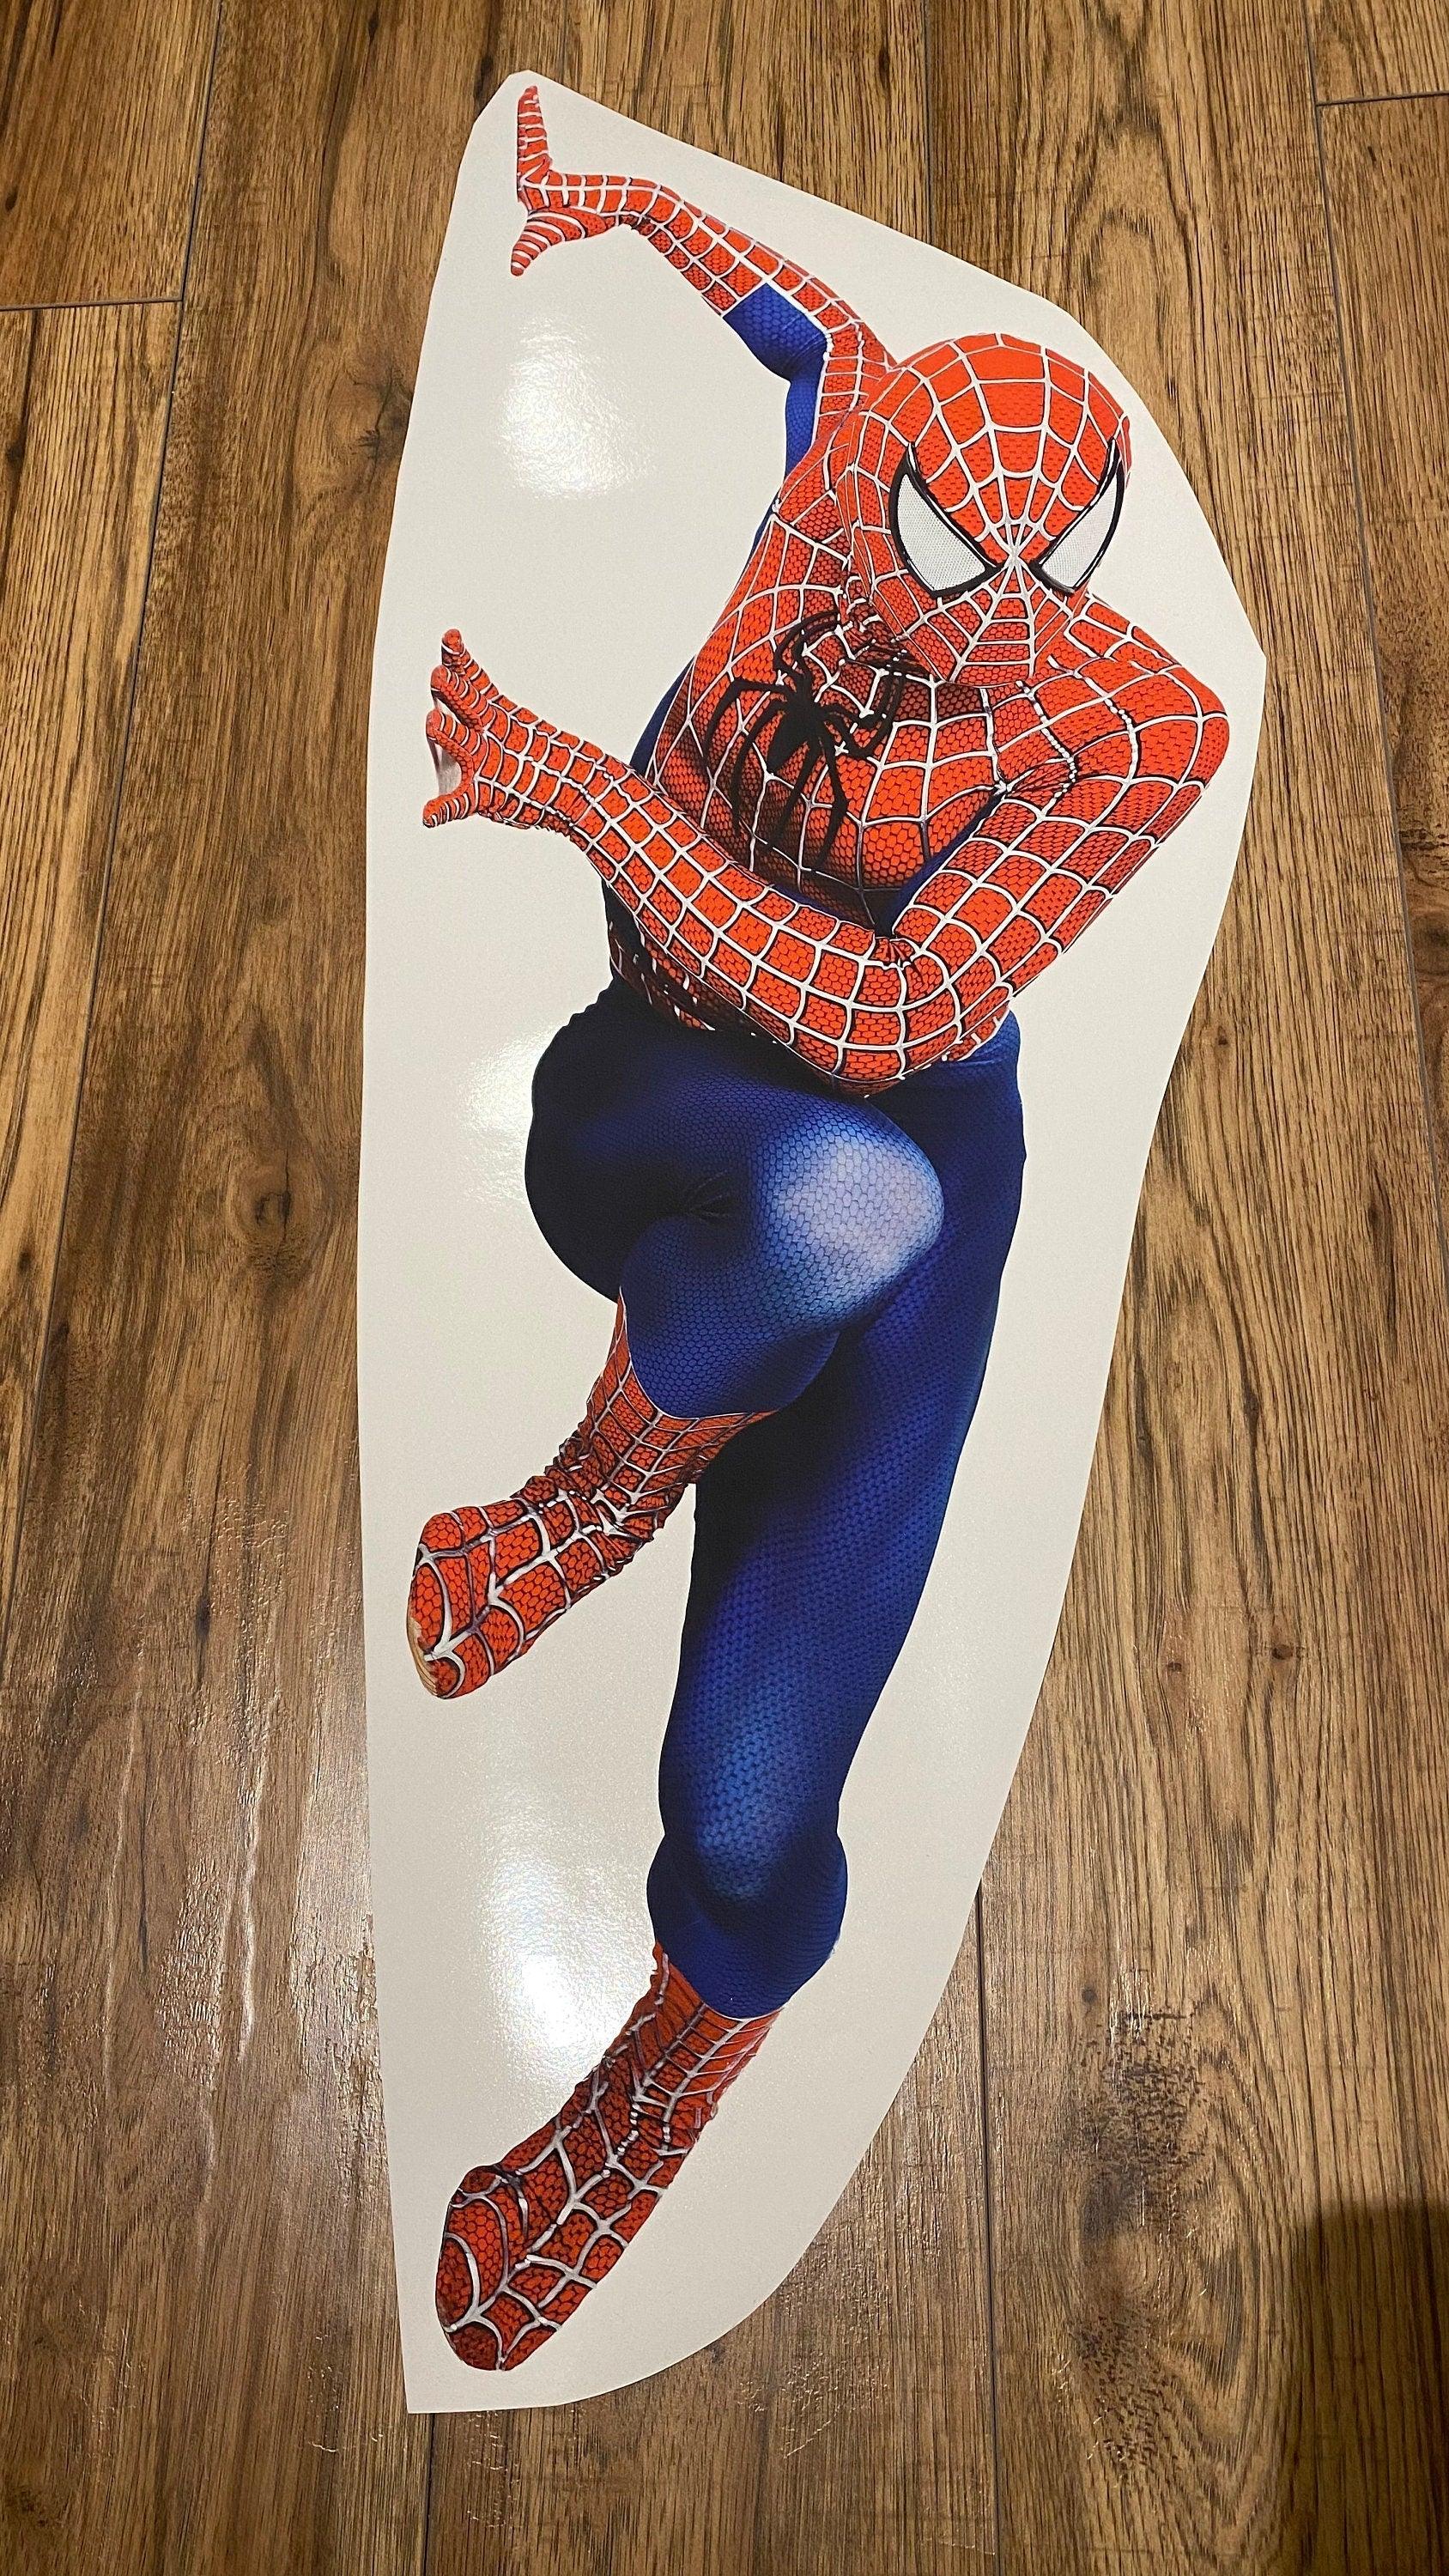 Spiderman Decal is a great addition to any Kids Room and 100% No Wall Damage